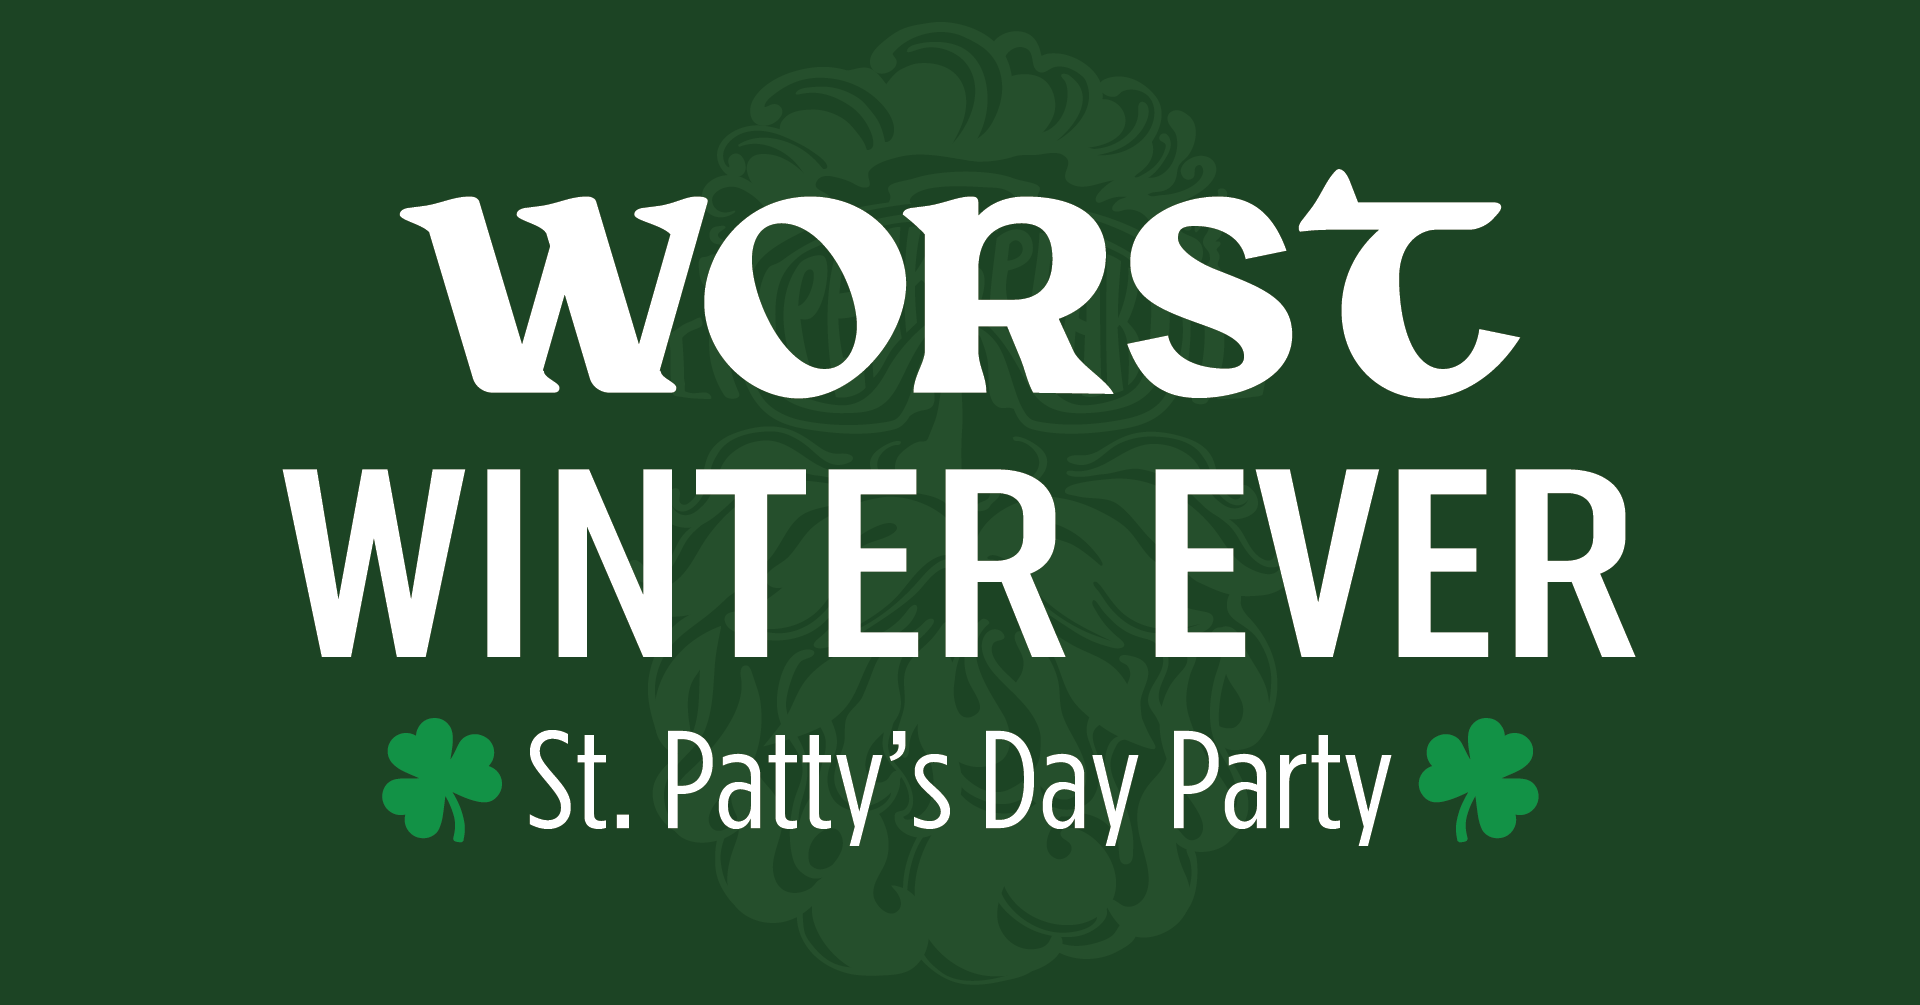 'Worst Winter Ever' St. Patty's Day Party at Peek'n Peak